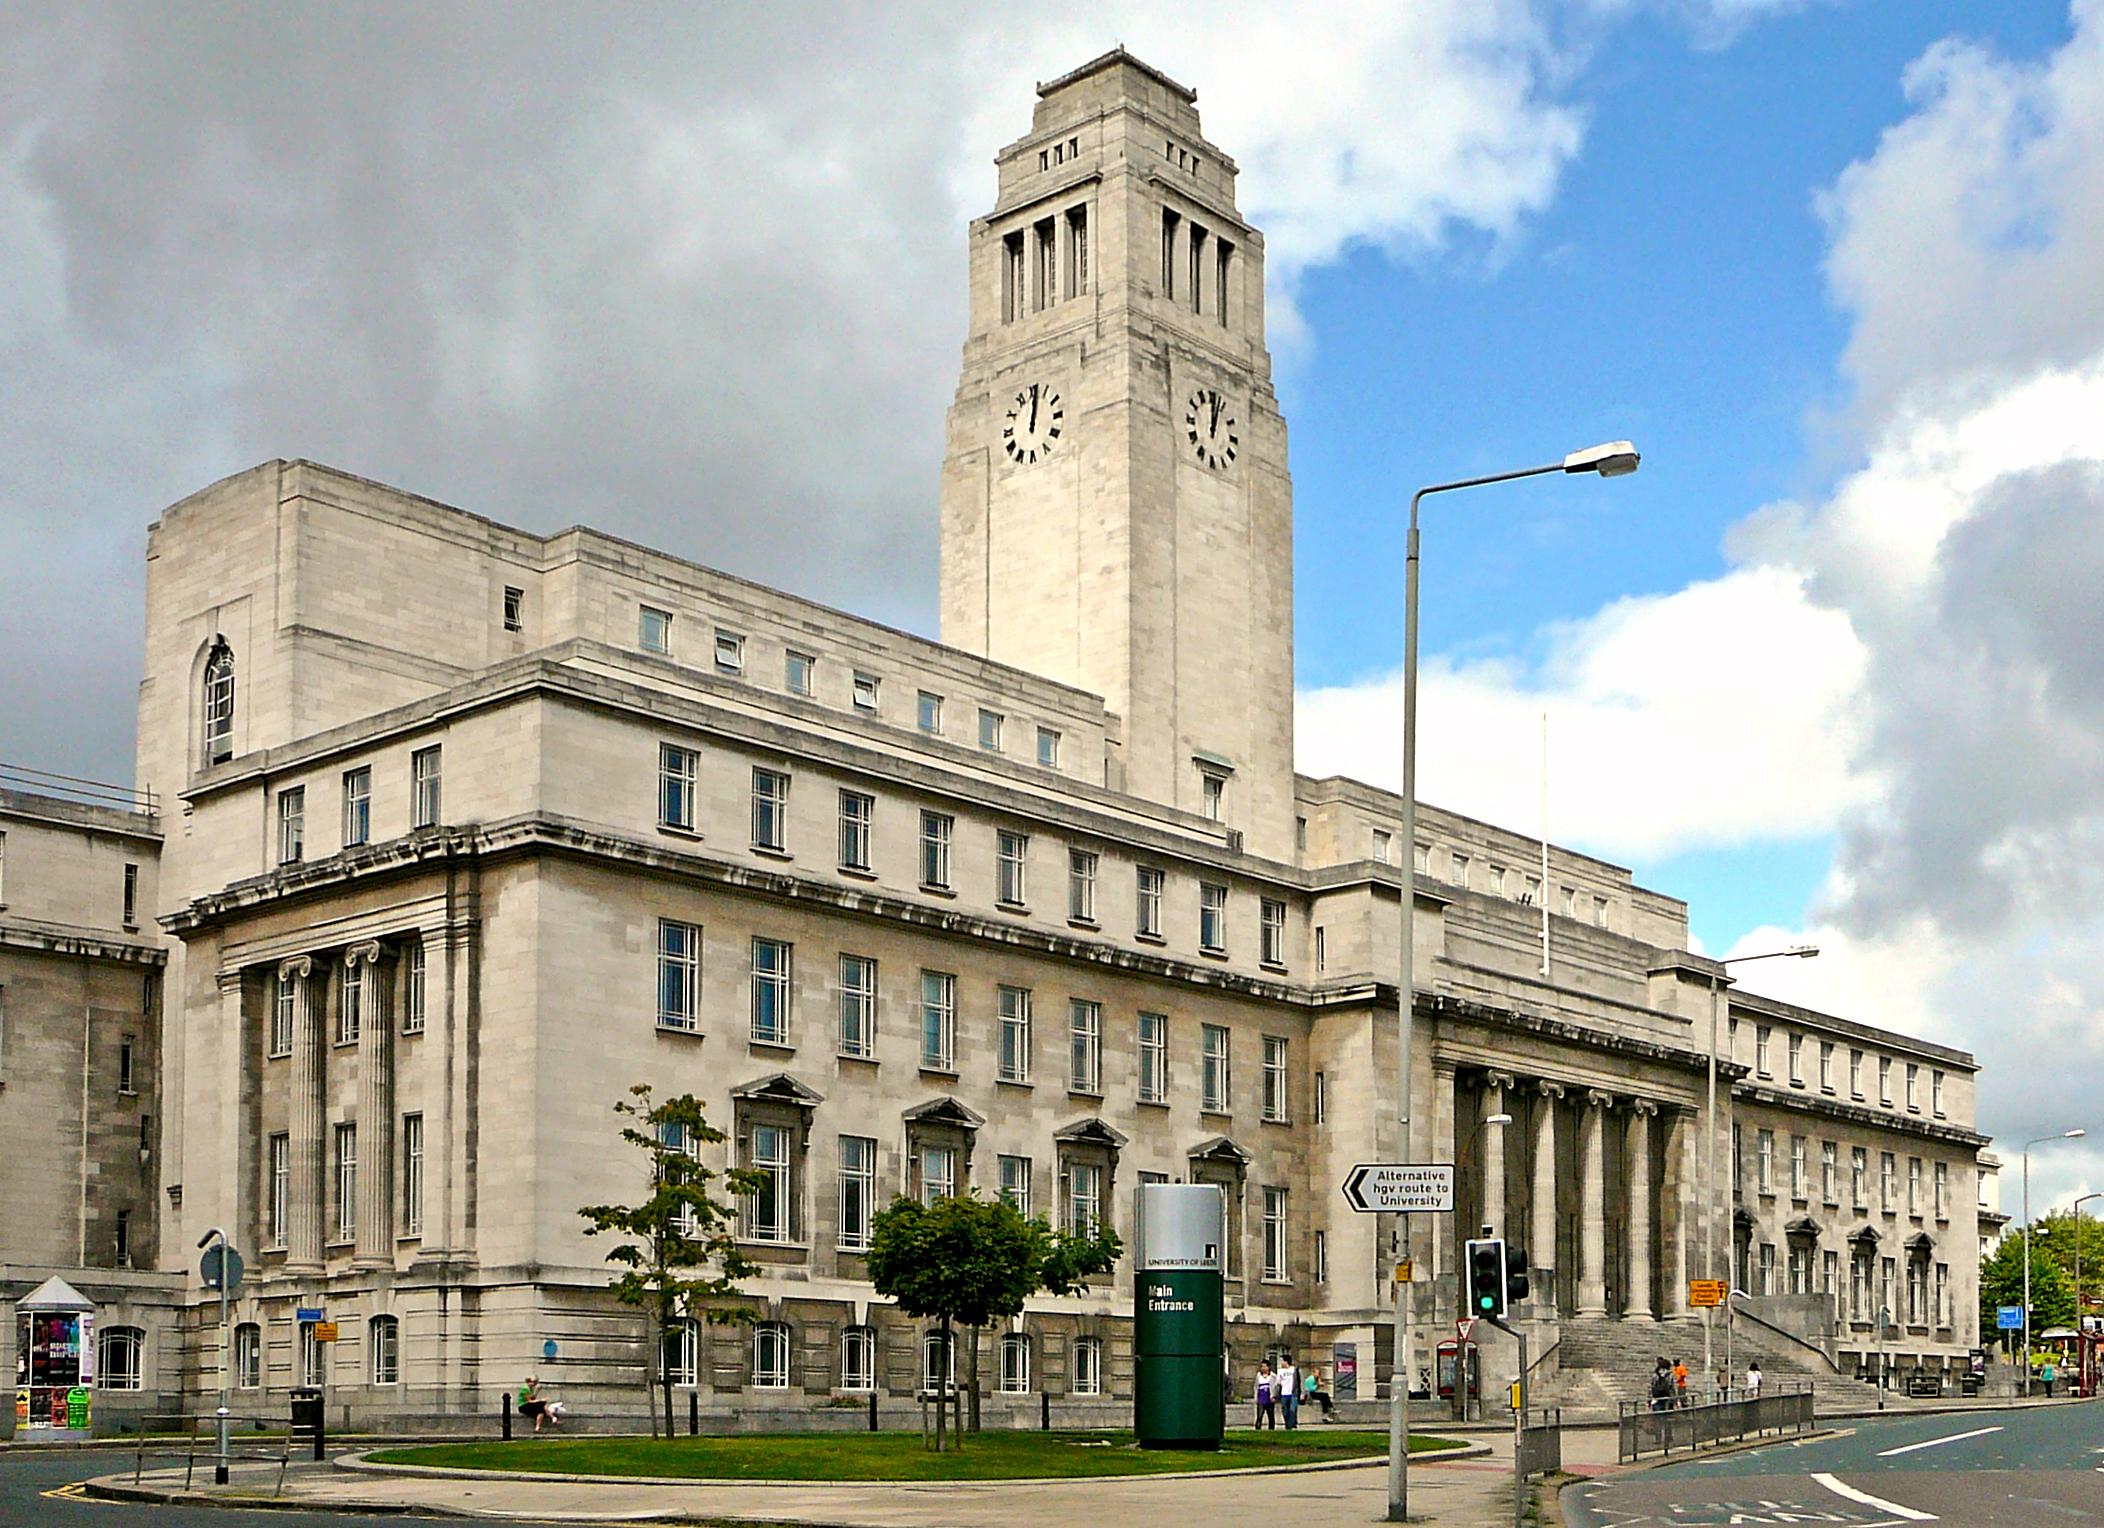 Parkinson Building, University of Leeds, Leeds, England. Credit Tim Green. Licensed under Creative Commons Attribution 2.0 Generic license (https://creativecommons.org/licenses/by/2.0/).